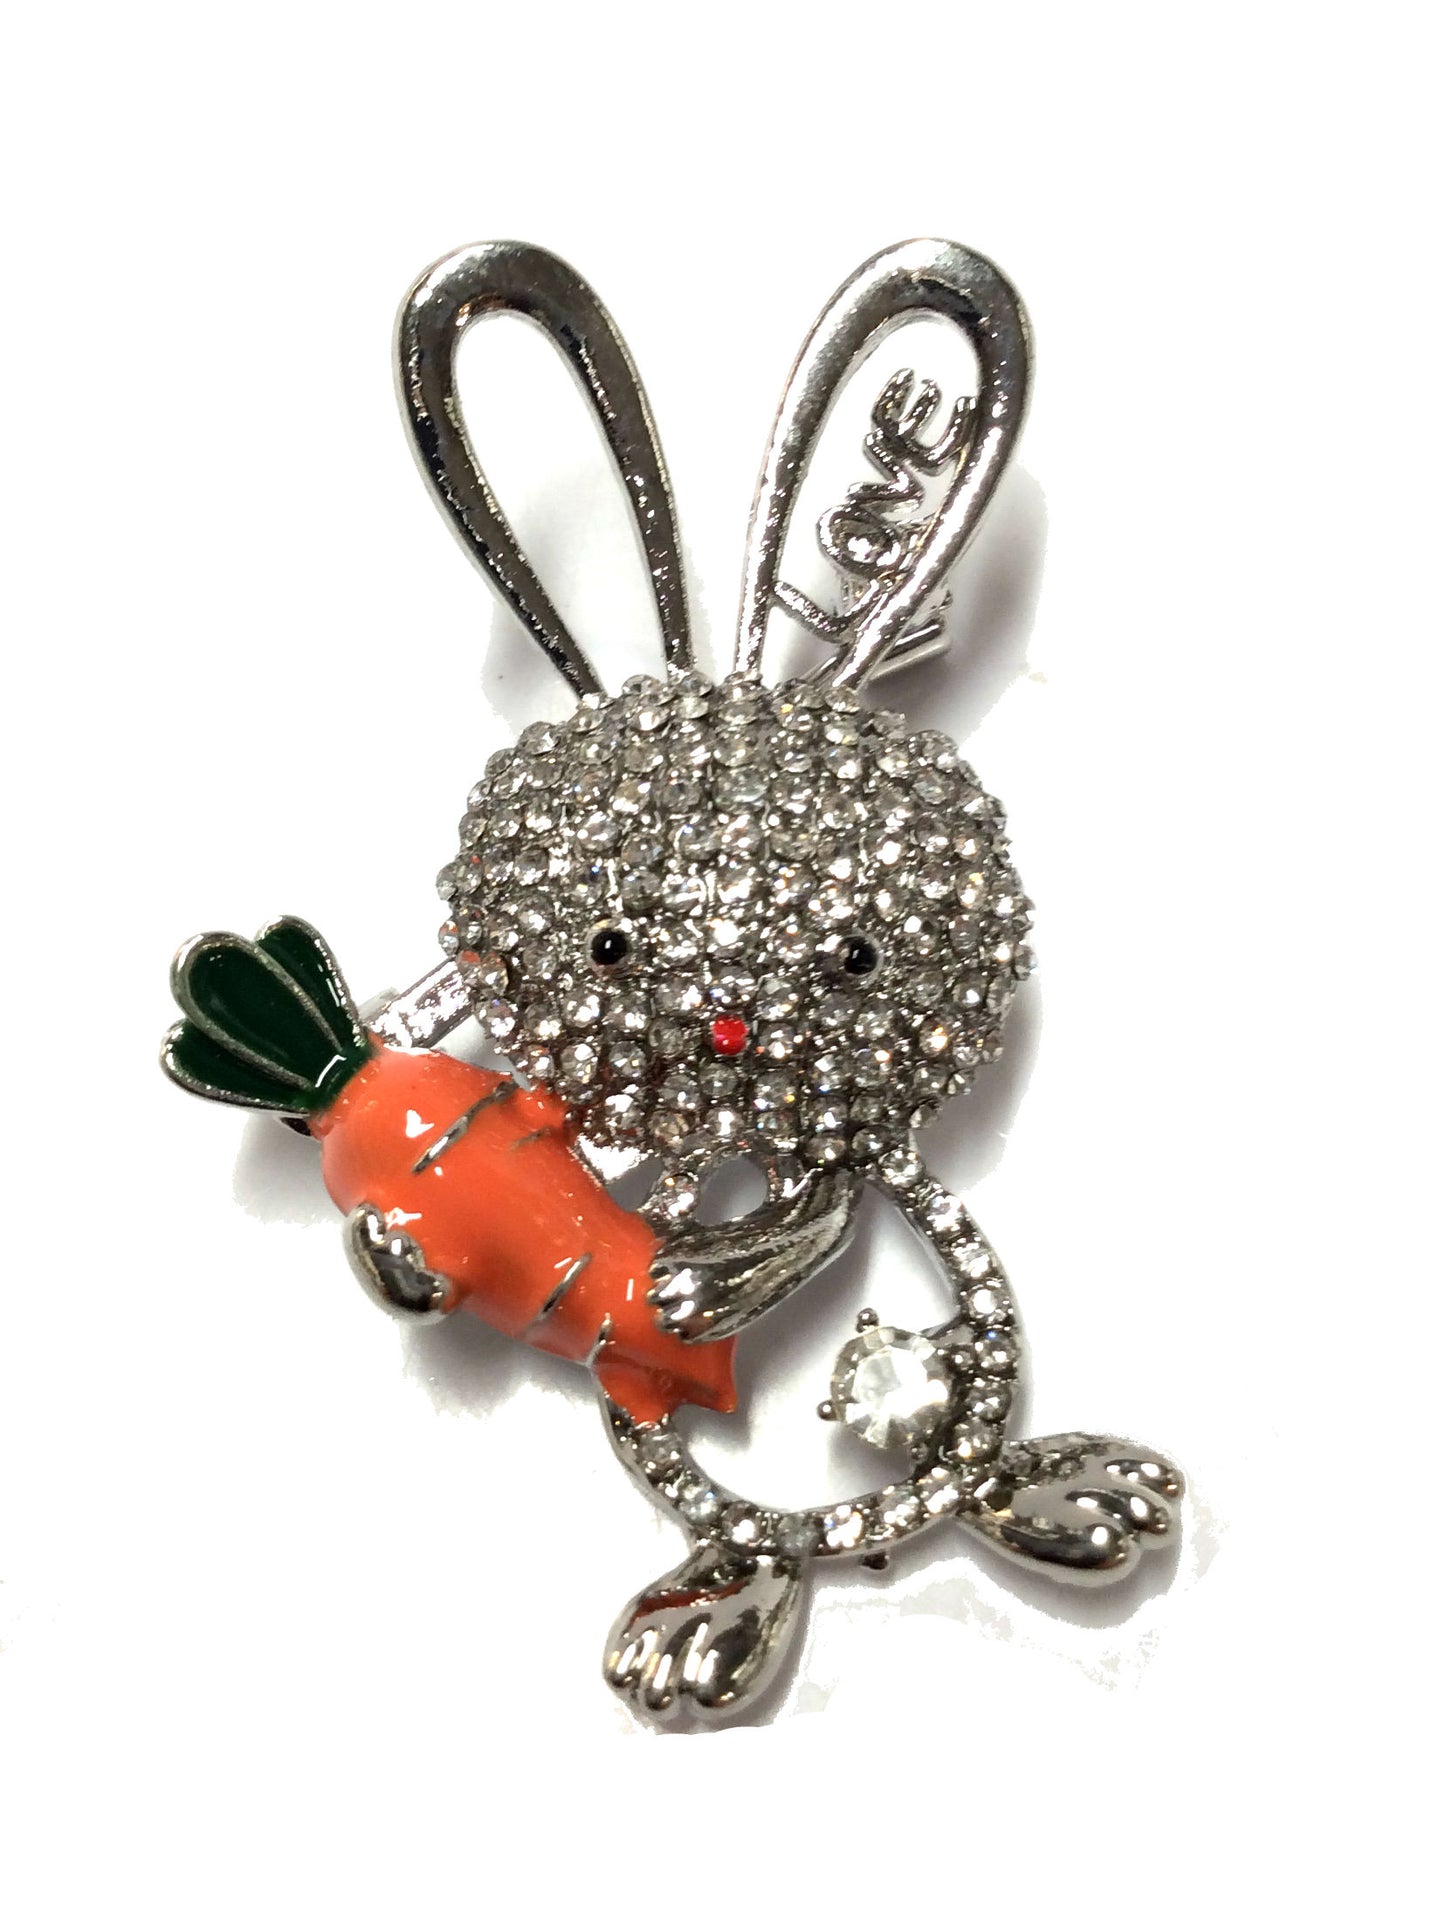 Bunny with Carrot Pin #89-91855